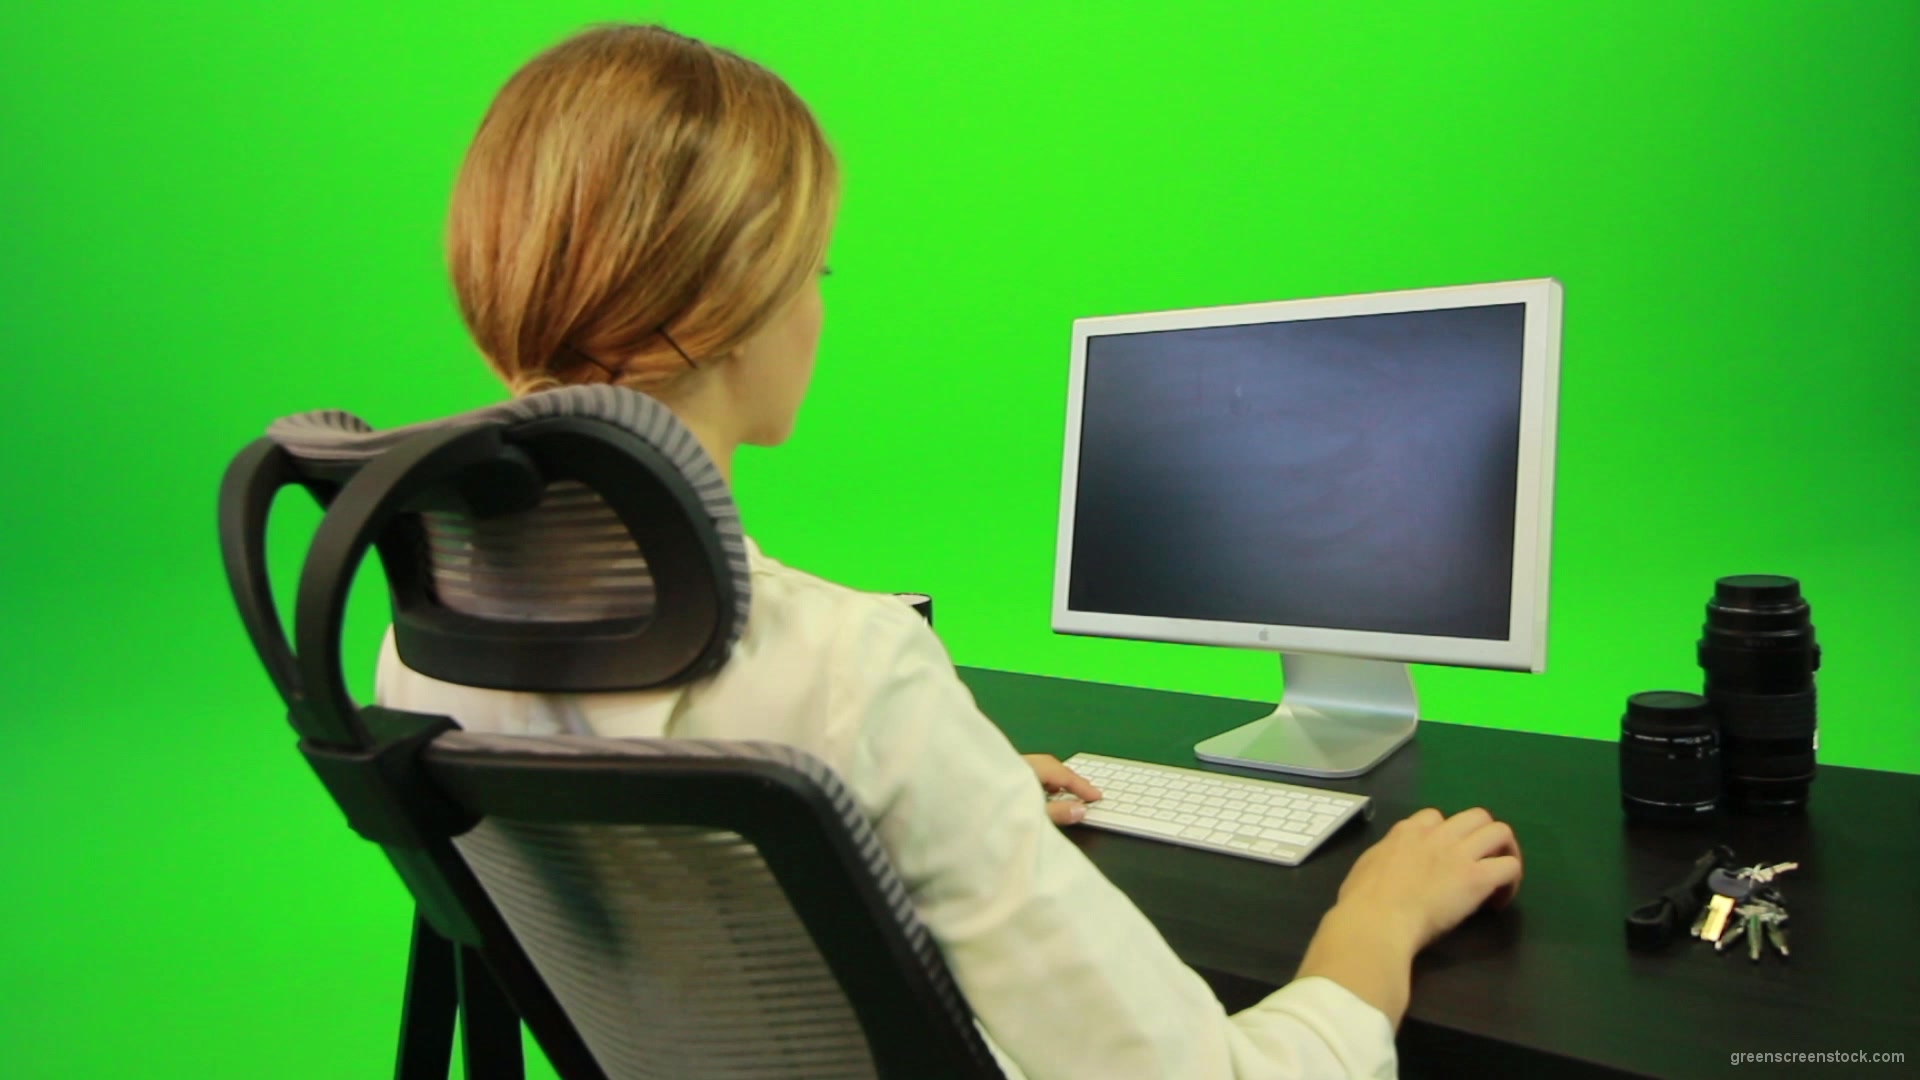 Woman-Working-on-the-Computer-5-Green-Screen-Footage_005 Green Screen Stock